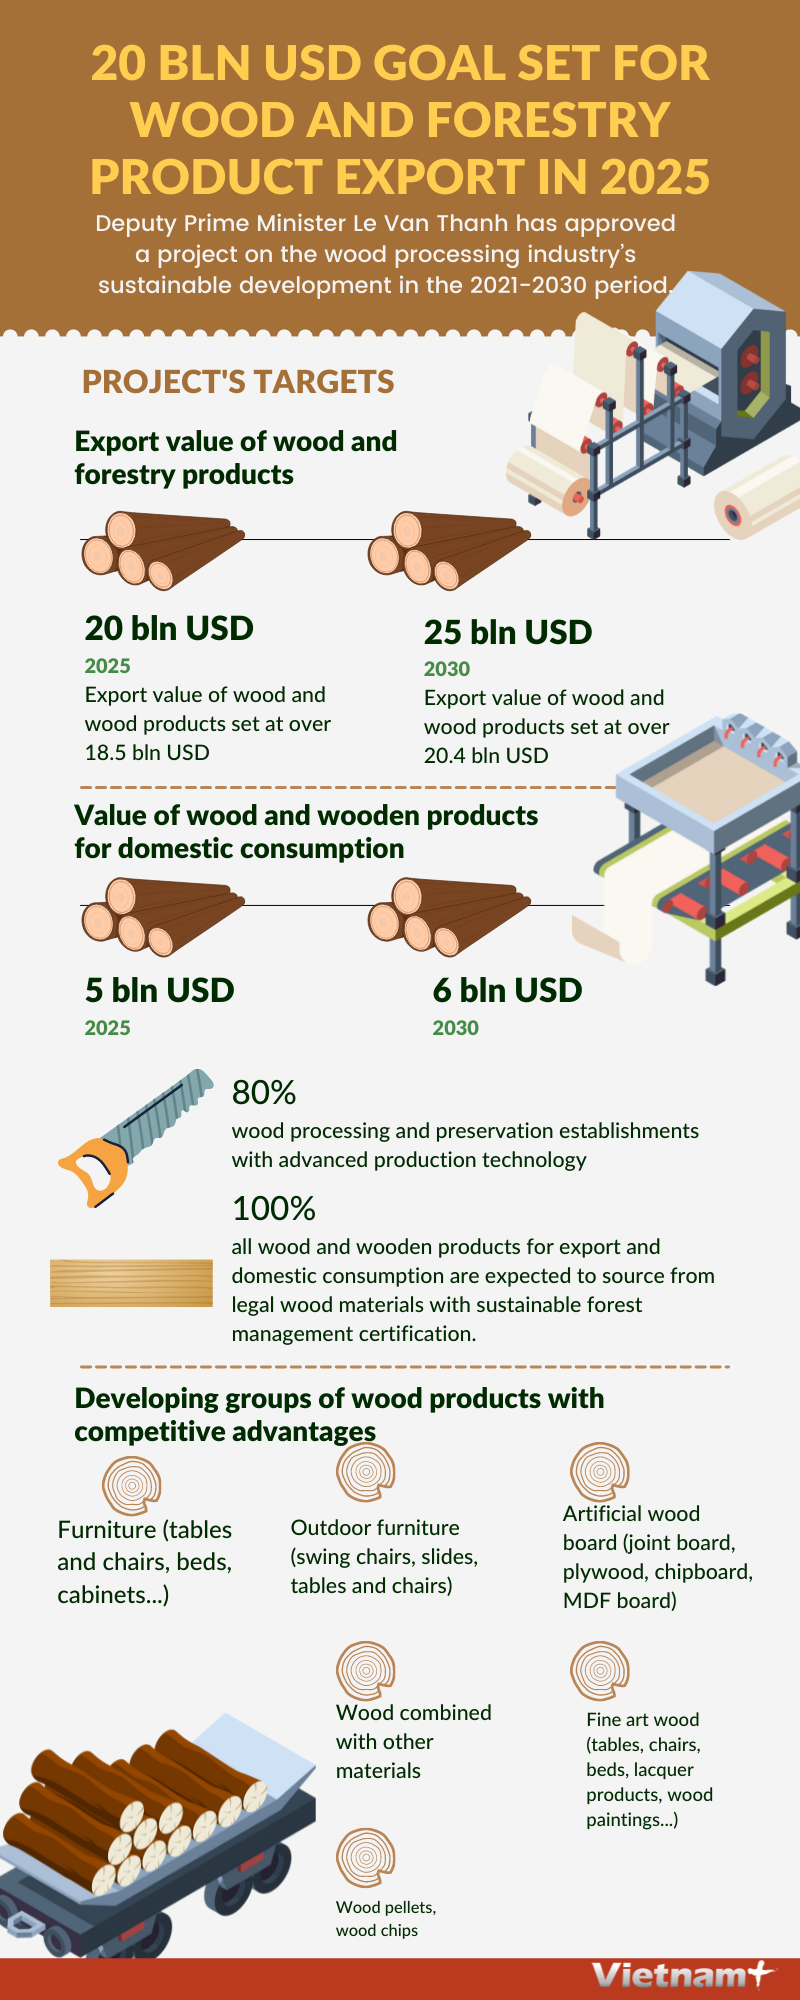 20 billion USD goal set for wood export in 2025 hinh anh 1